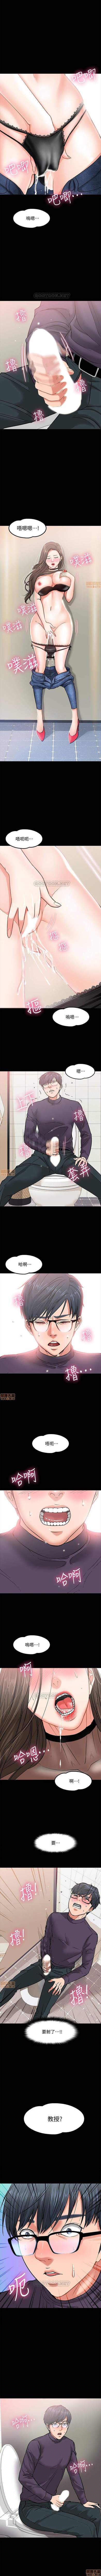 Roughsex PROFESSOR, ARE YOU JUST GOING TO LOOK AT ME? | DESIRE SWAMP | 教授，你還等什麼? Ch. 3 [Chinese] Manhwa Art - Page 7